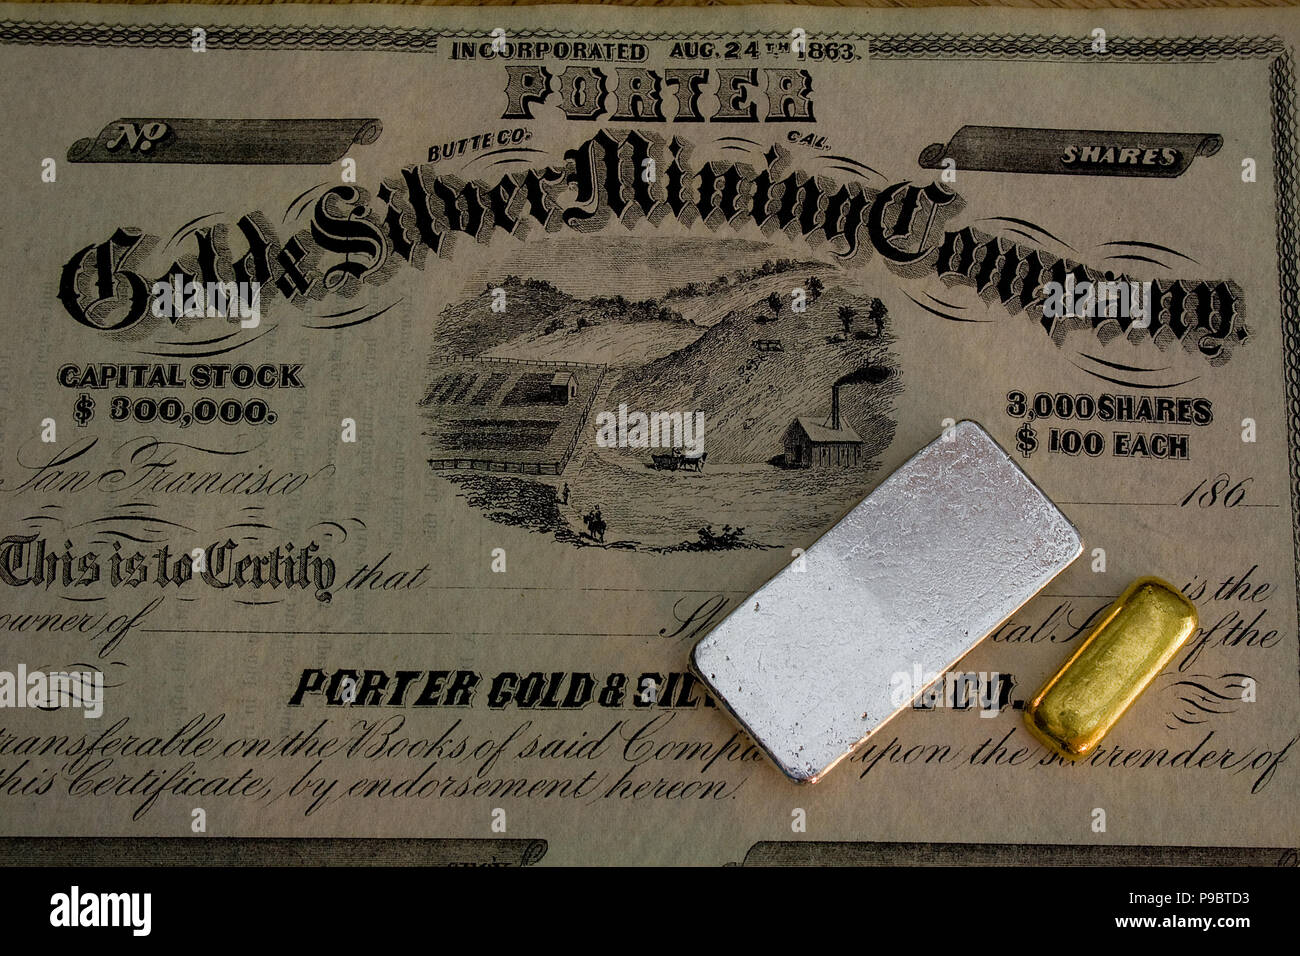 Authentic 1860s Porter Gold and Silver Mining Company stock certificate -  California. Genuine gold and silver bars also shown. Stock Photo